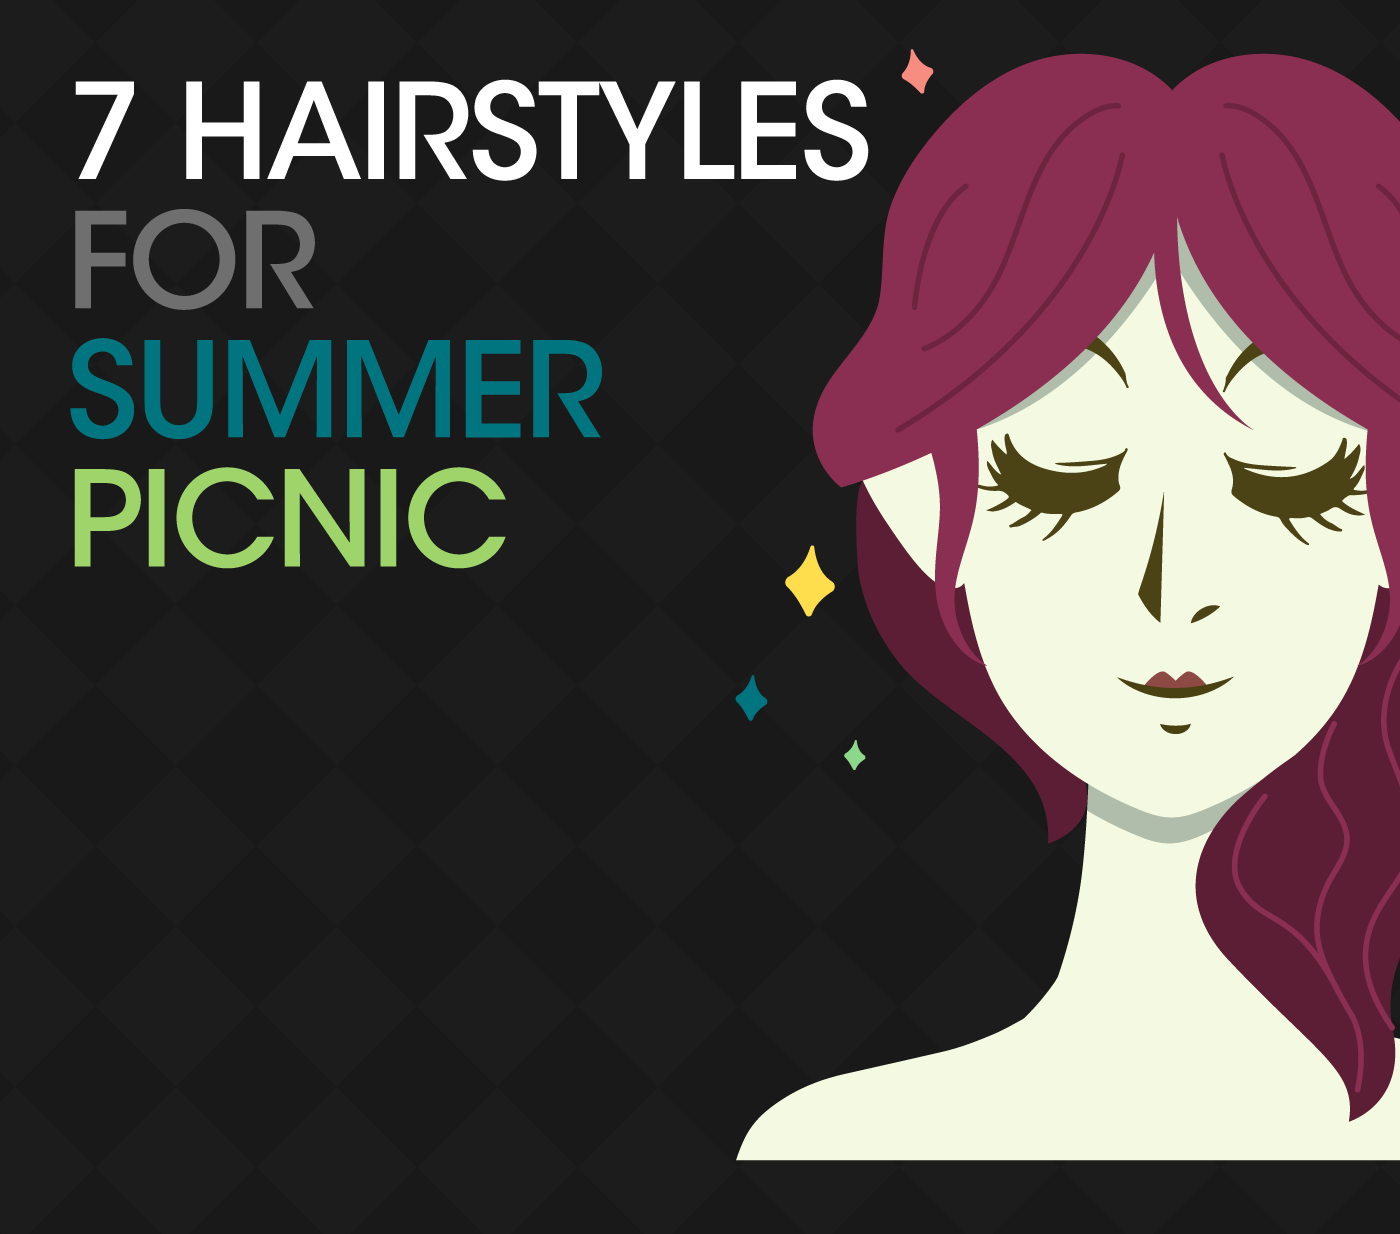 Summer Picnic Hairstyles